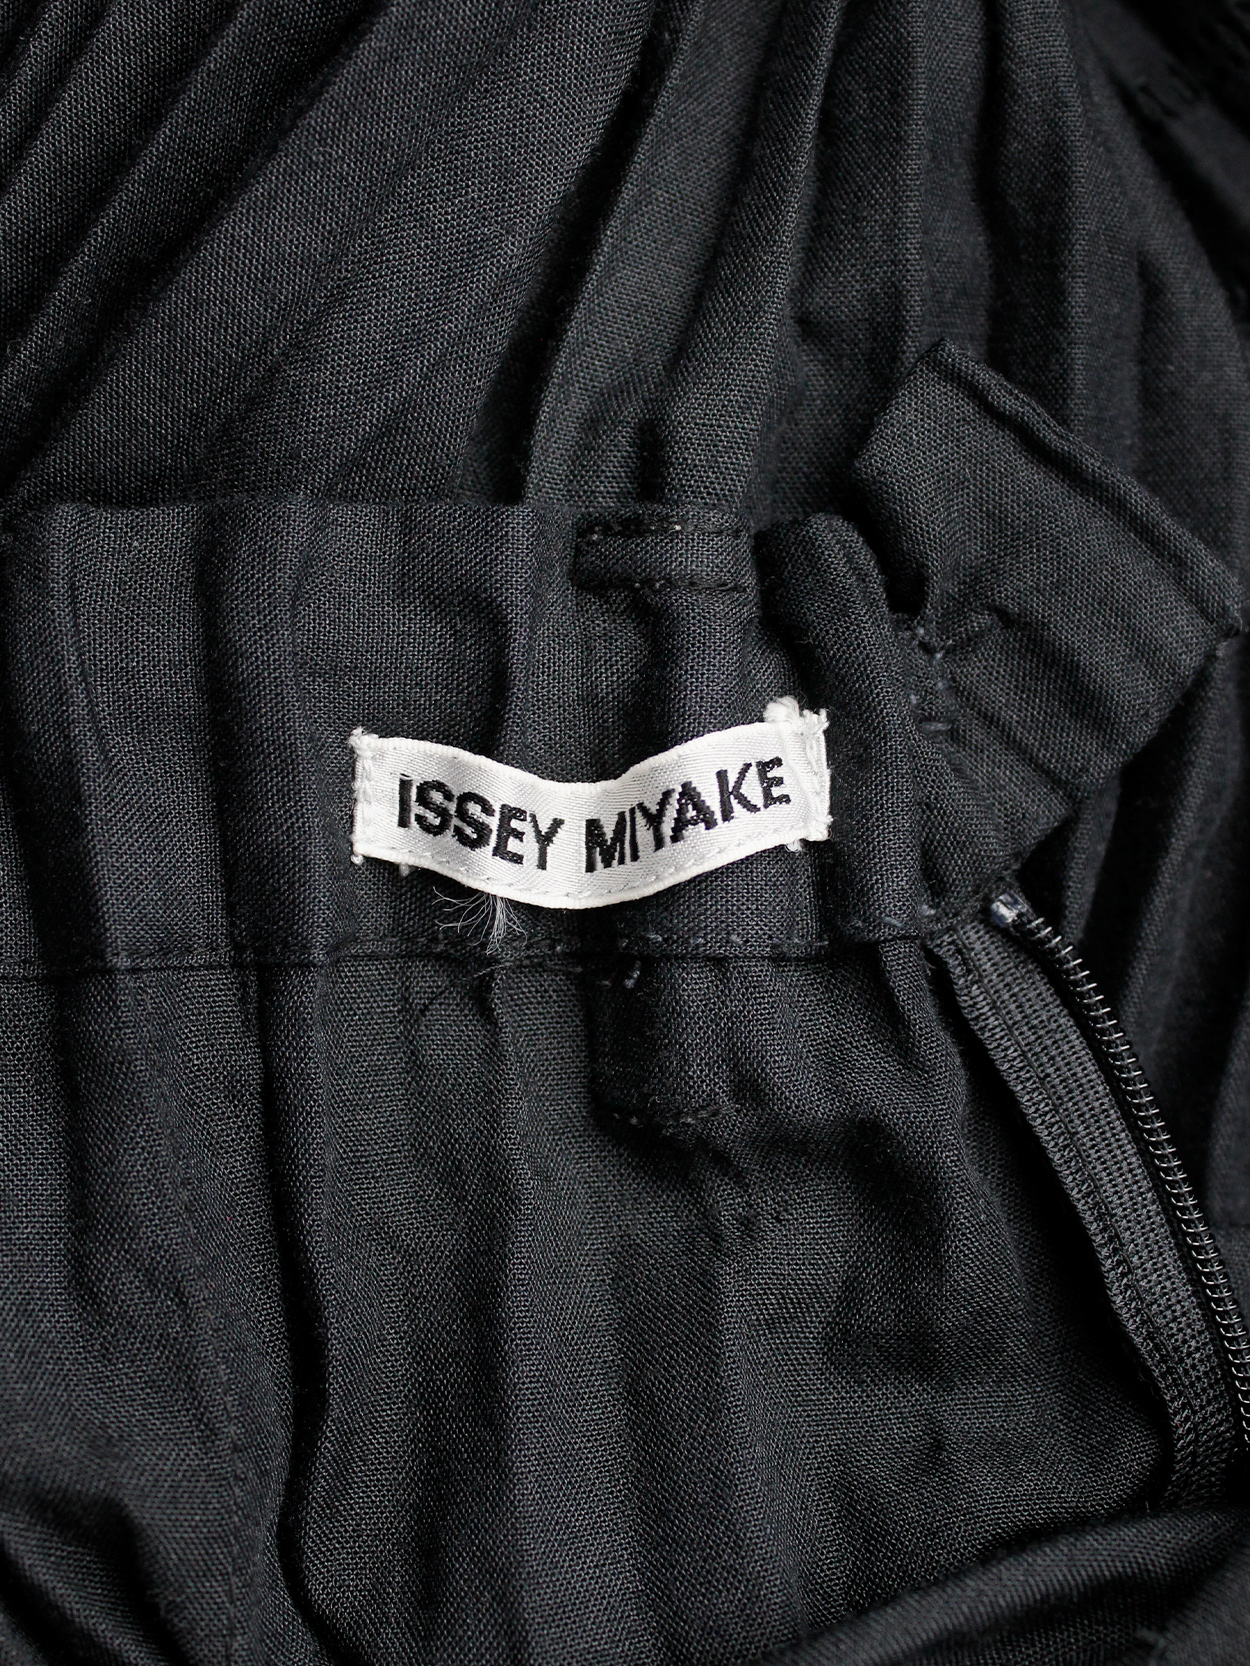 Issey Miyake black skirt with accordeon pleats and knitted lace lines ...